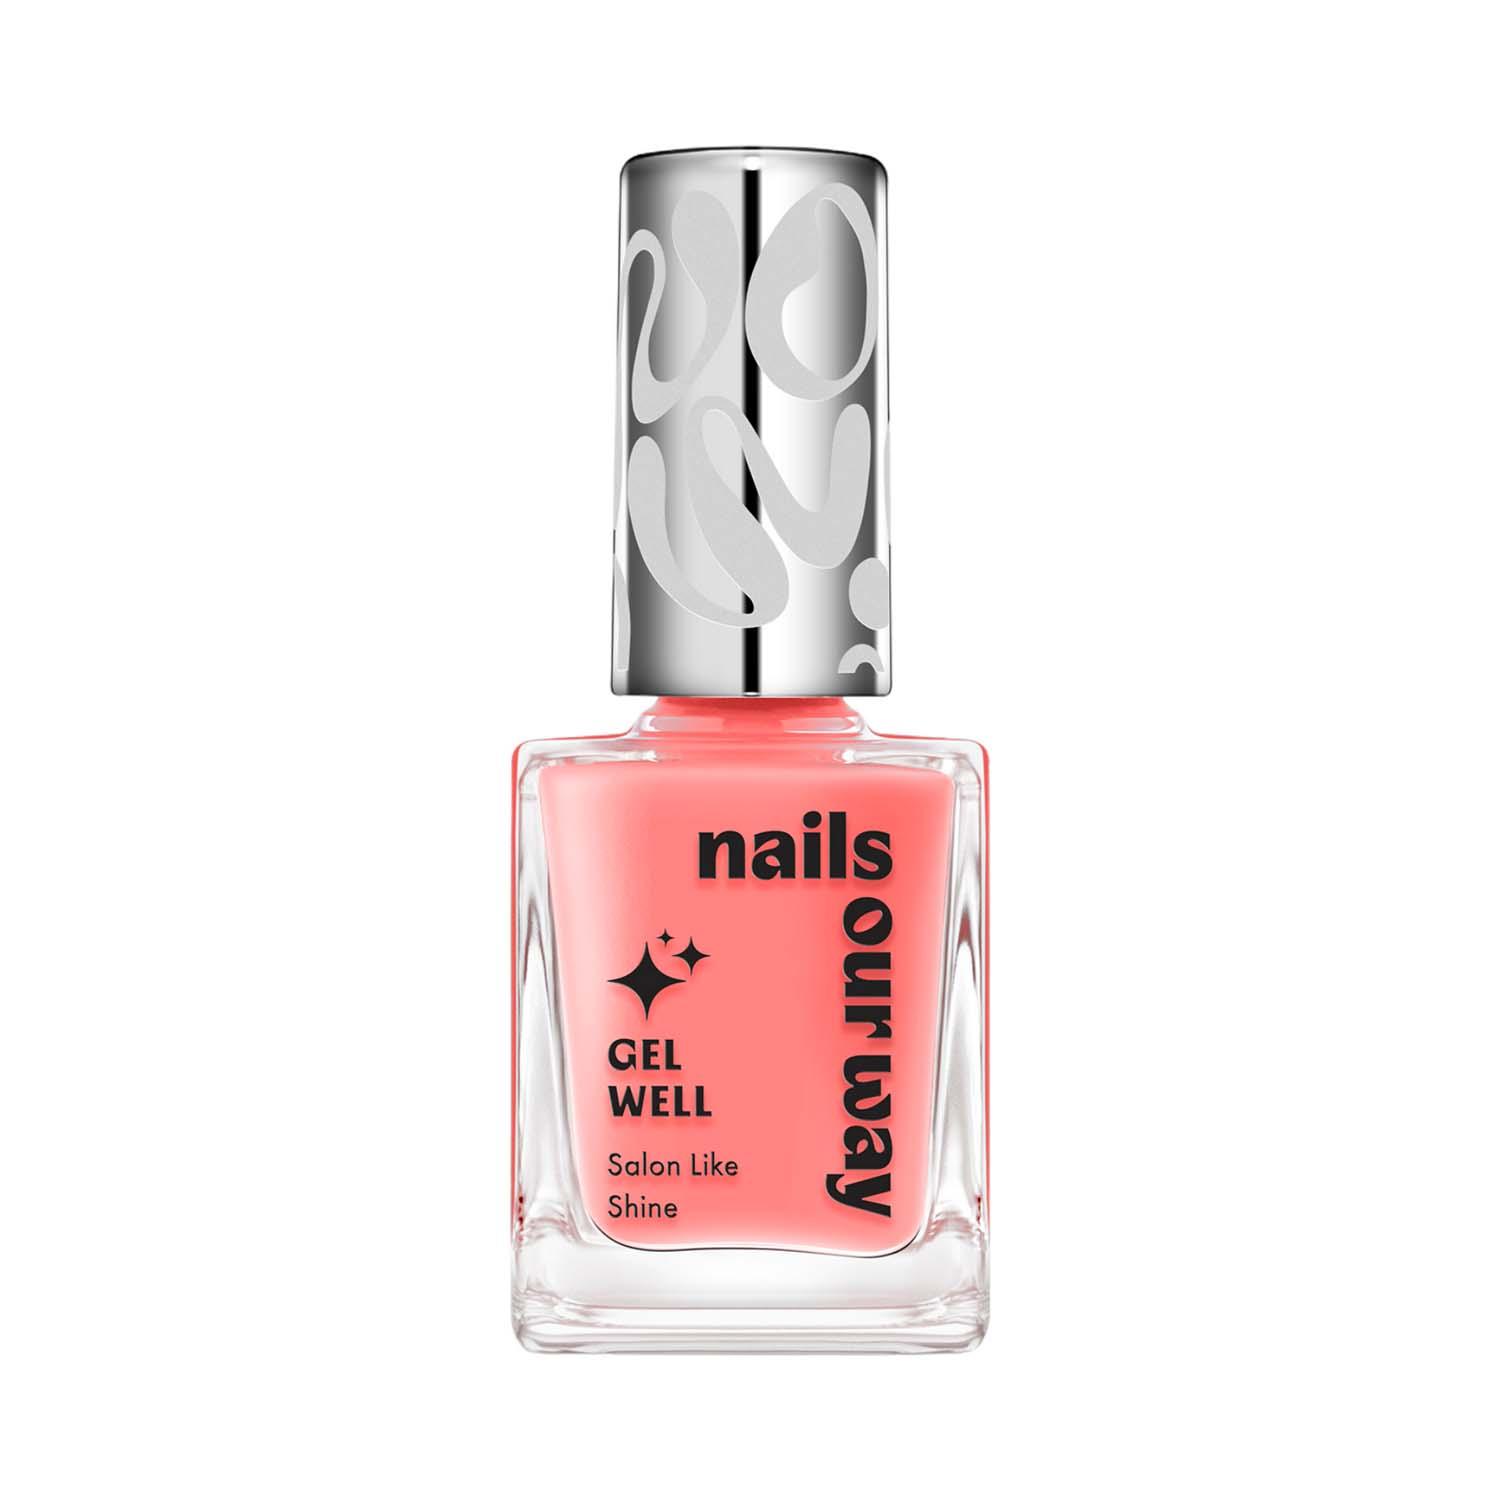 Nails Our Way | Nails Our Way Gel Well Nail Enamel - 206 Chic (10 ml)